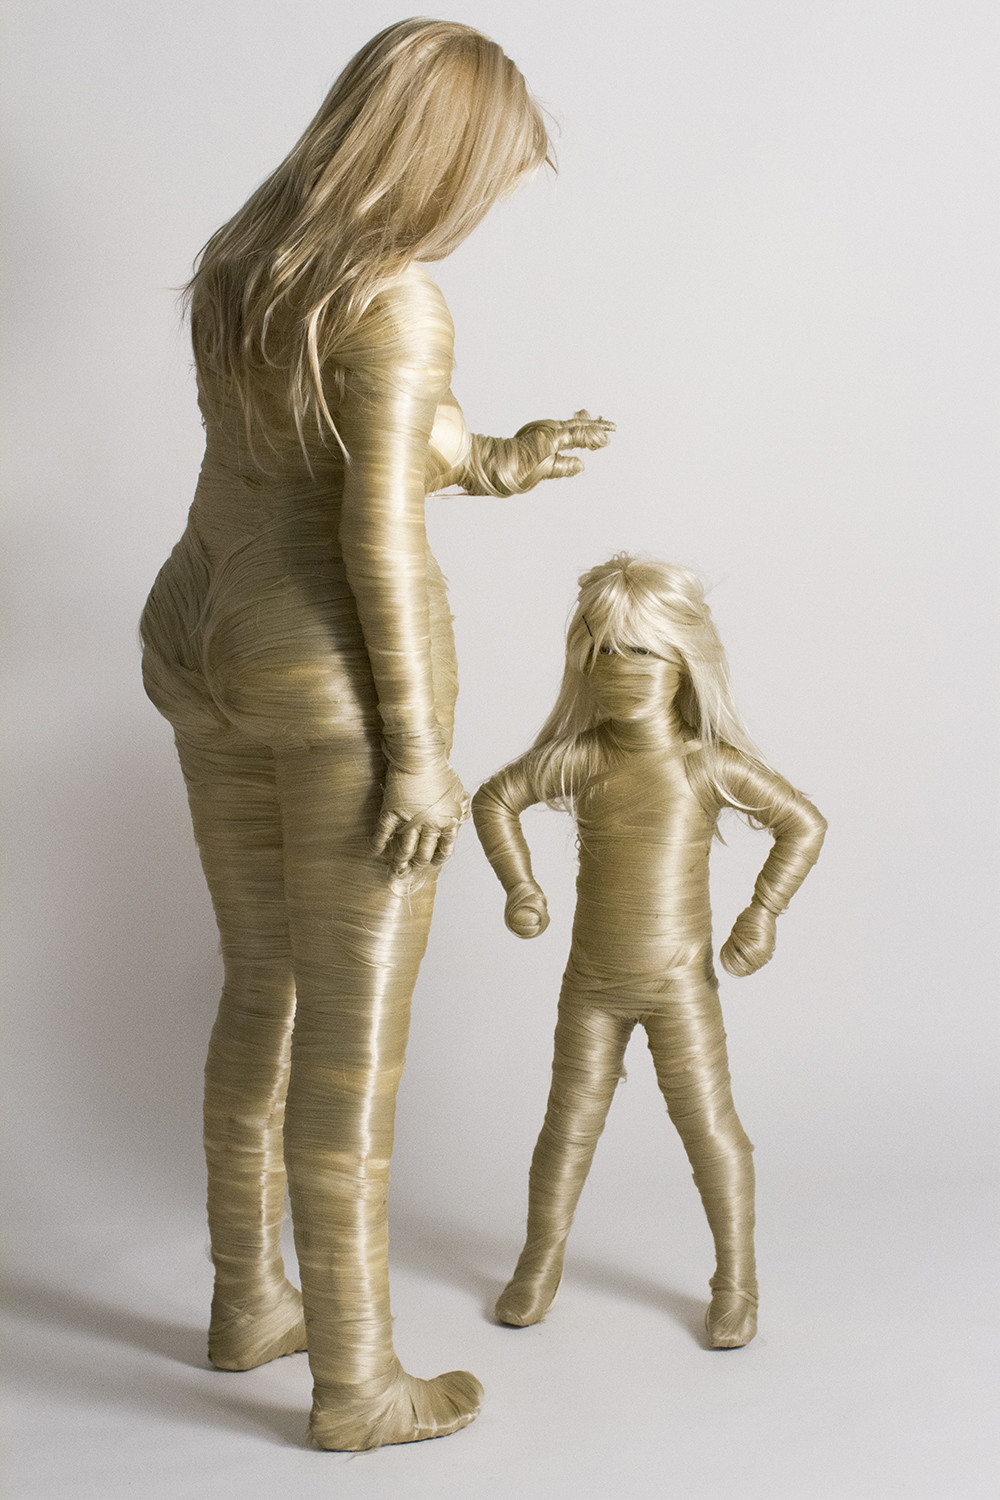 Hair People, Surreal And Poetic Figurative Sculptures By Lauren Carly Shaw (3)